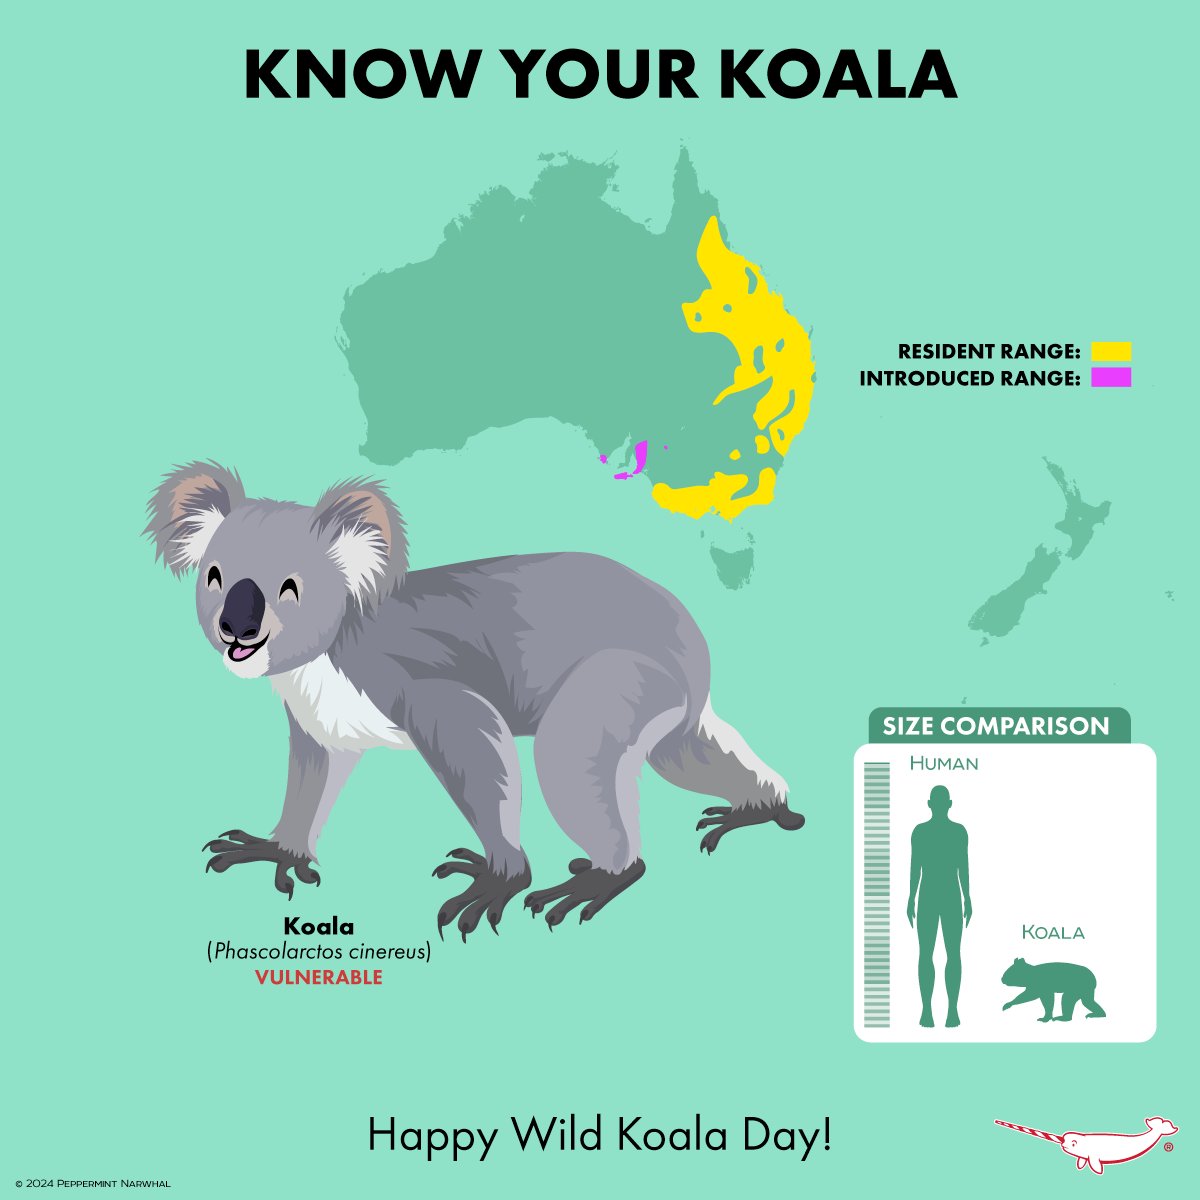 #WildKoalaDay #KnowYourKoala #Koala Merch: peppermintnarwhal.com/s/search?q=koa… & for More cool animal merchandise Shop #PeppermintNarwhal: peppermintnarwhal.com International Shoppers visit our store on Etsy: etsy.com/shop/Peppermin… #KnowYourPhascolarcto #KnowYourAnimals